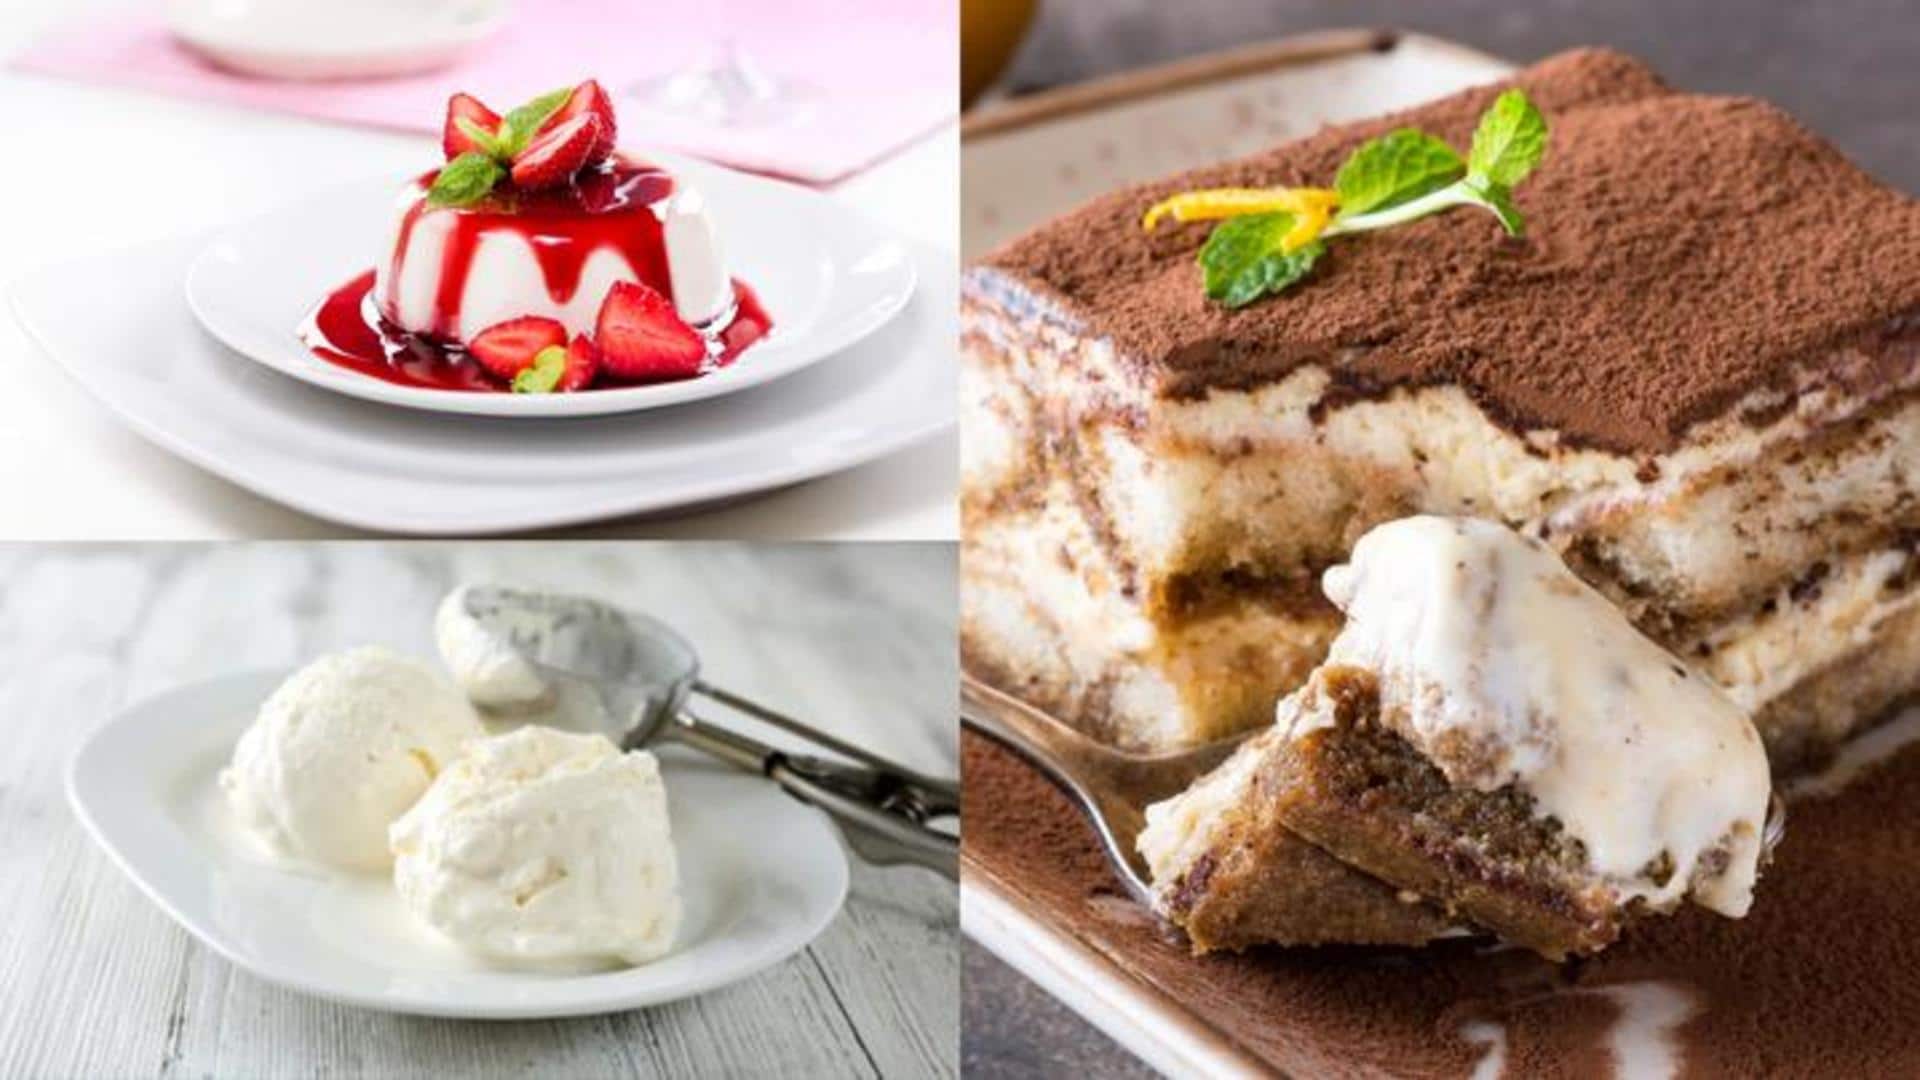 5 unique Italian dessert recipes you can try at home